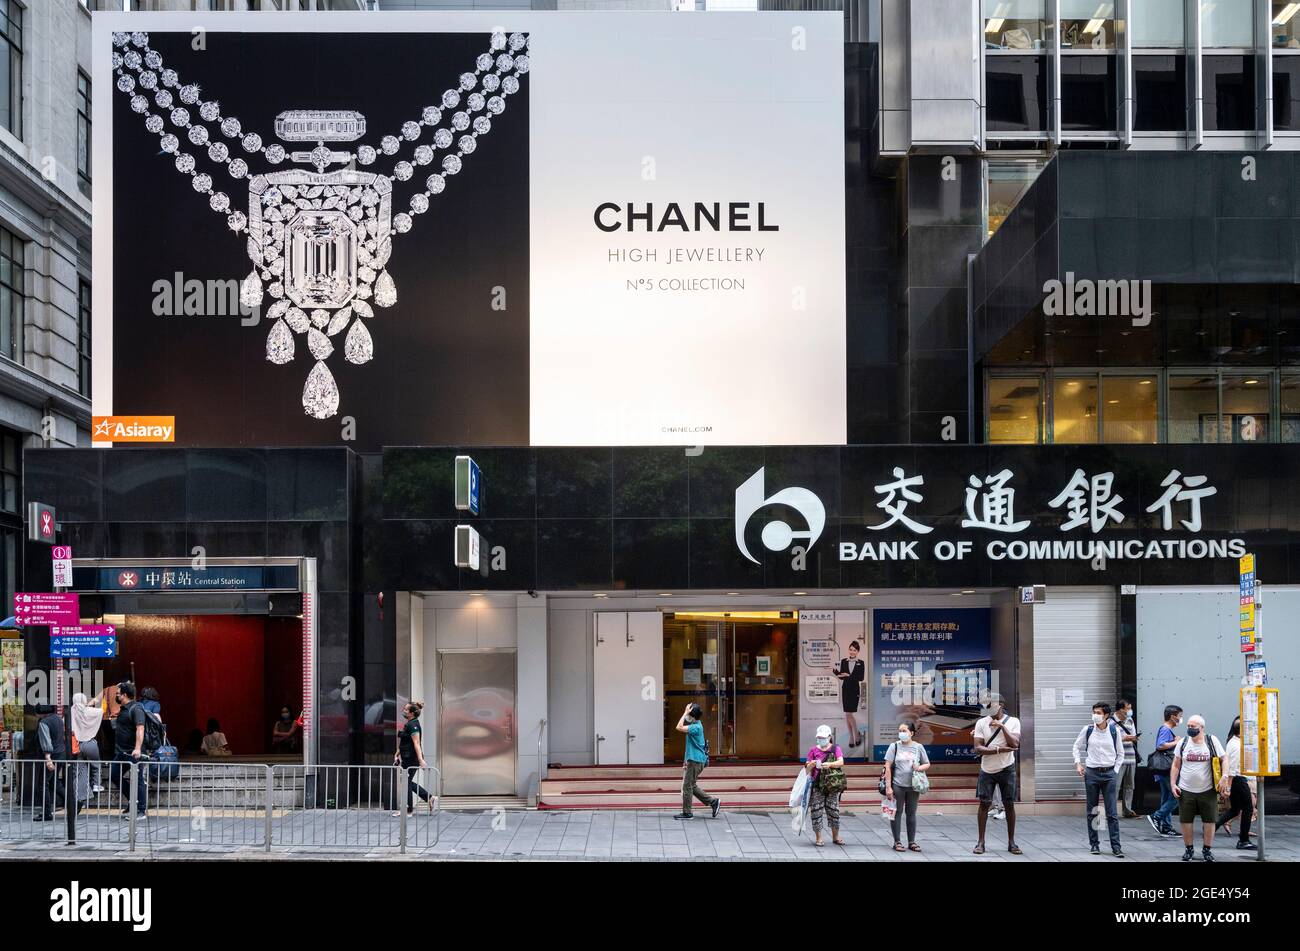 HKIA awards 34 new luxury licences including Chanel and Louis Vuitton icon  stores